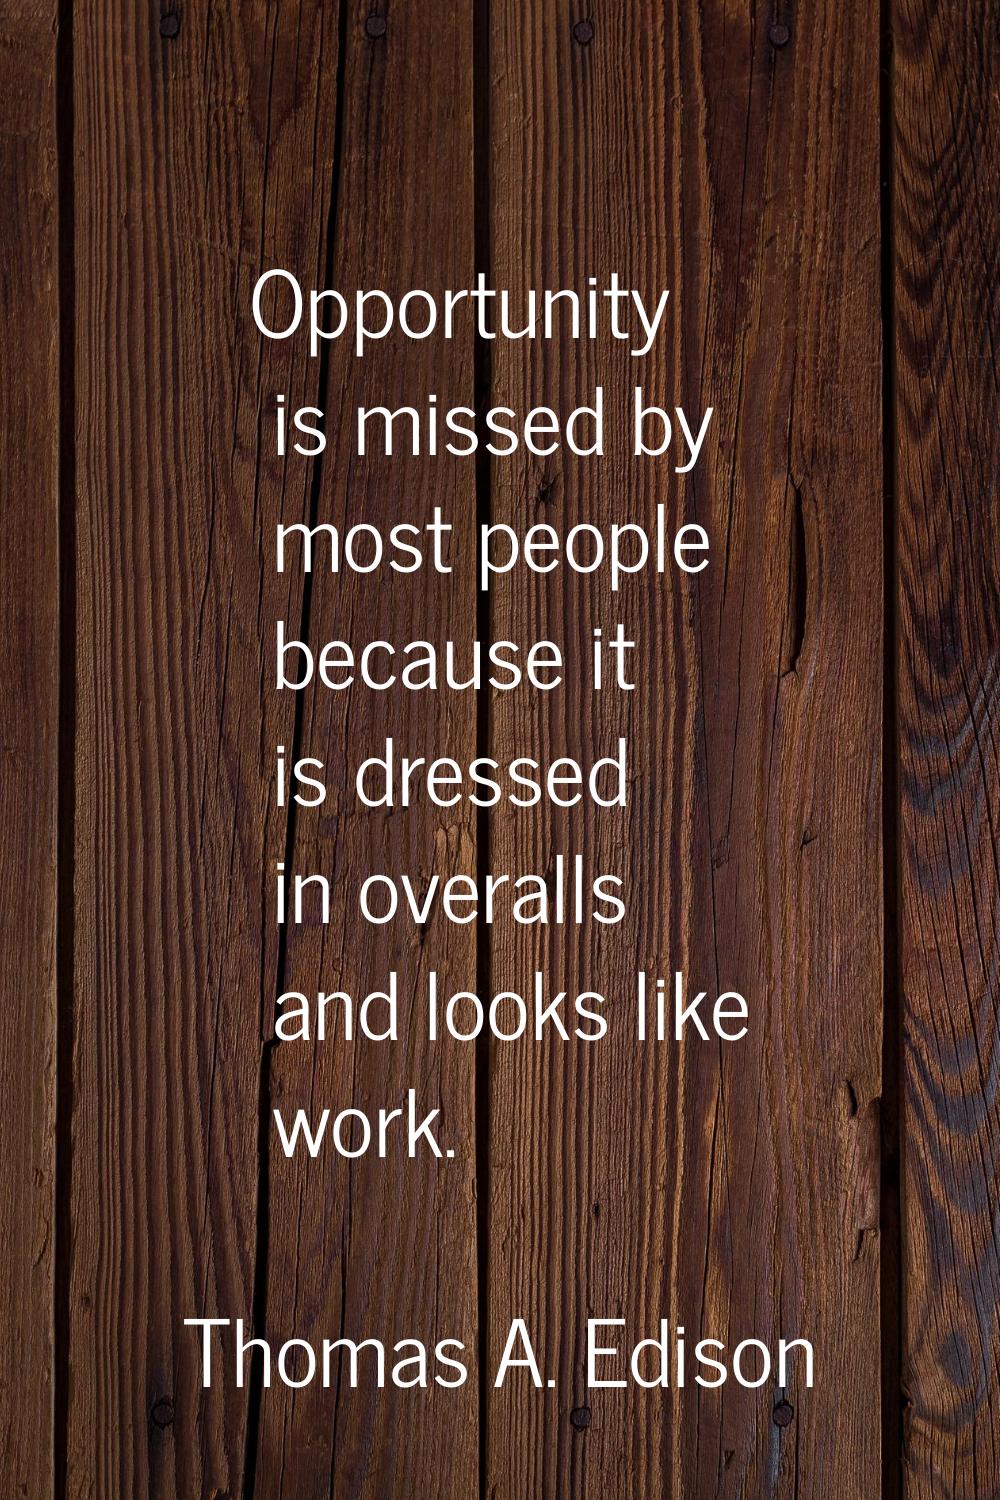 Opportunity is missed by most people because it is dressed in overalls and looks like work.